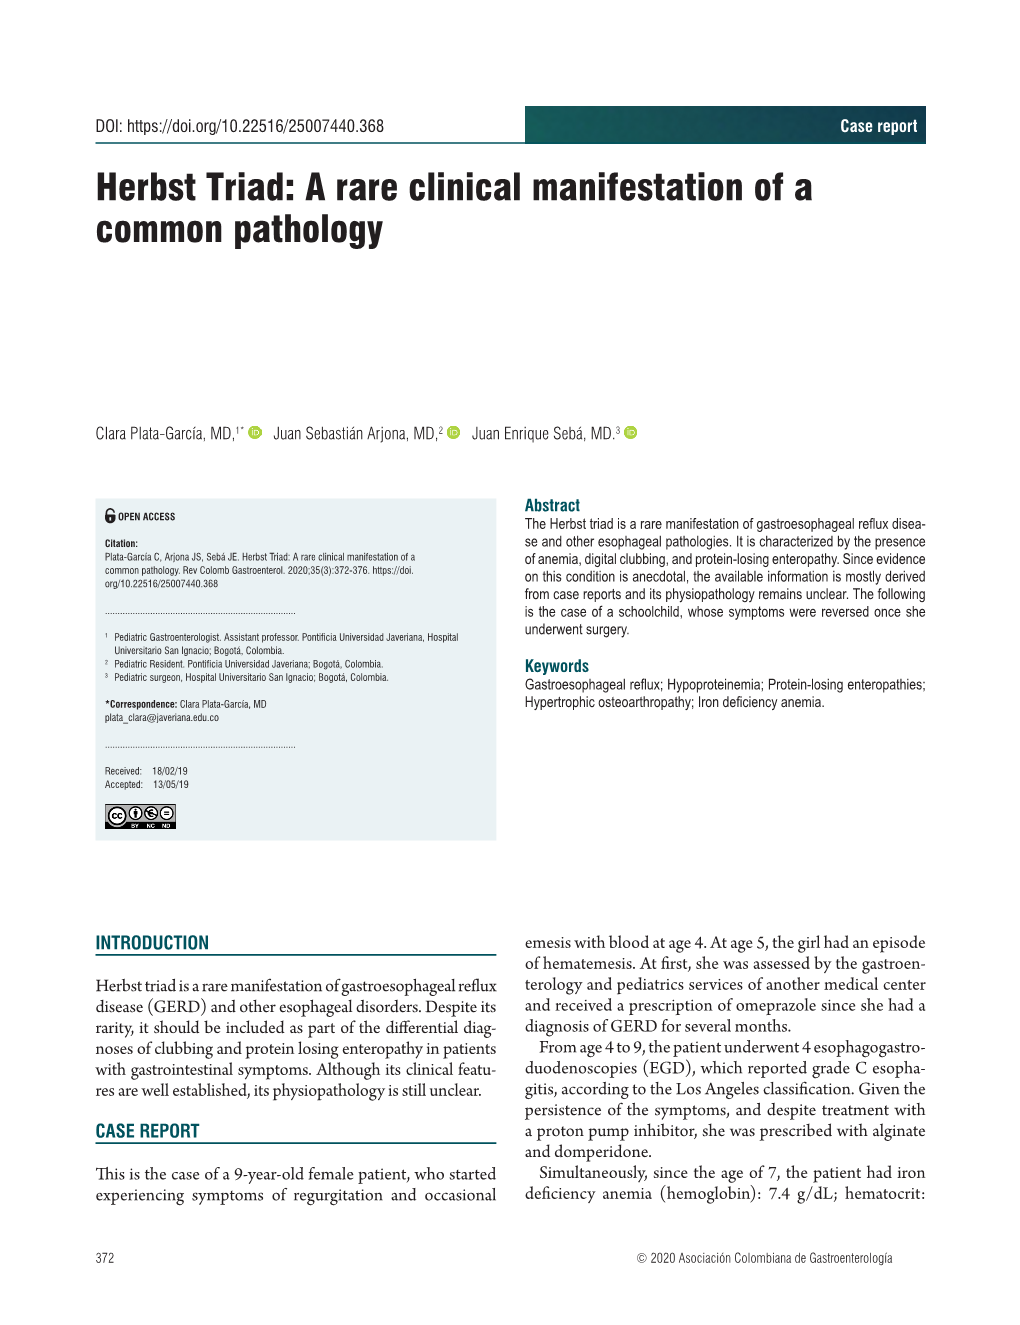 Herbst Triad: a Rare Clinical Manifestation of a Common Pathology